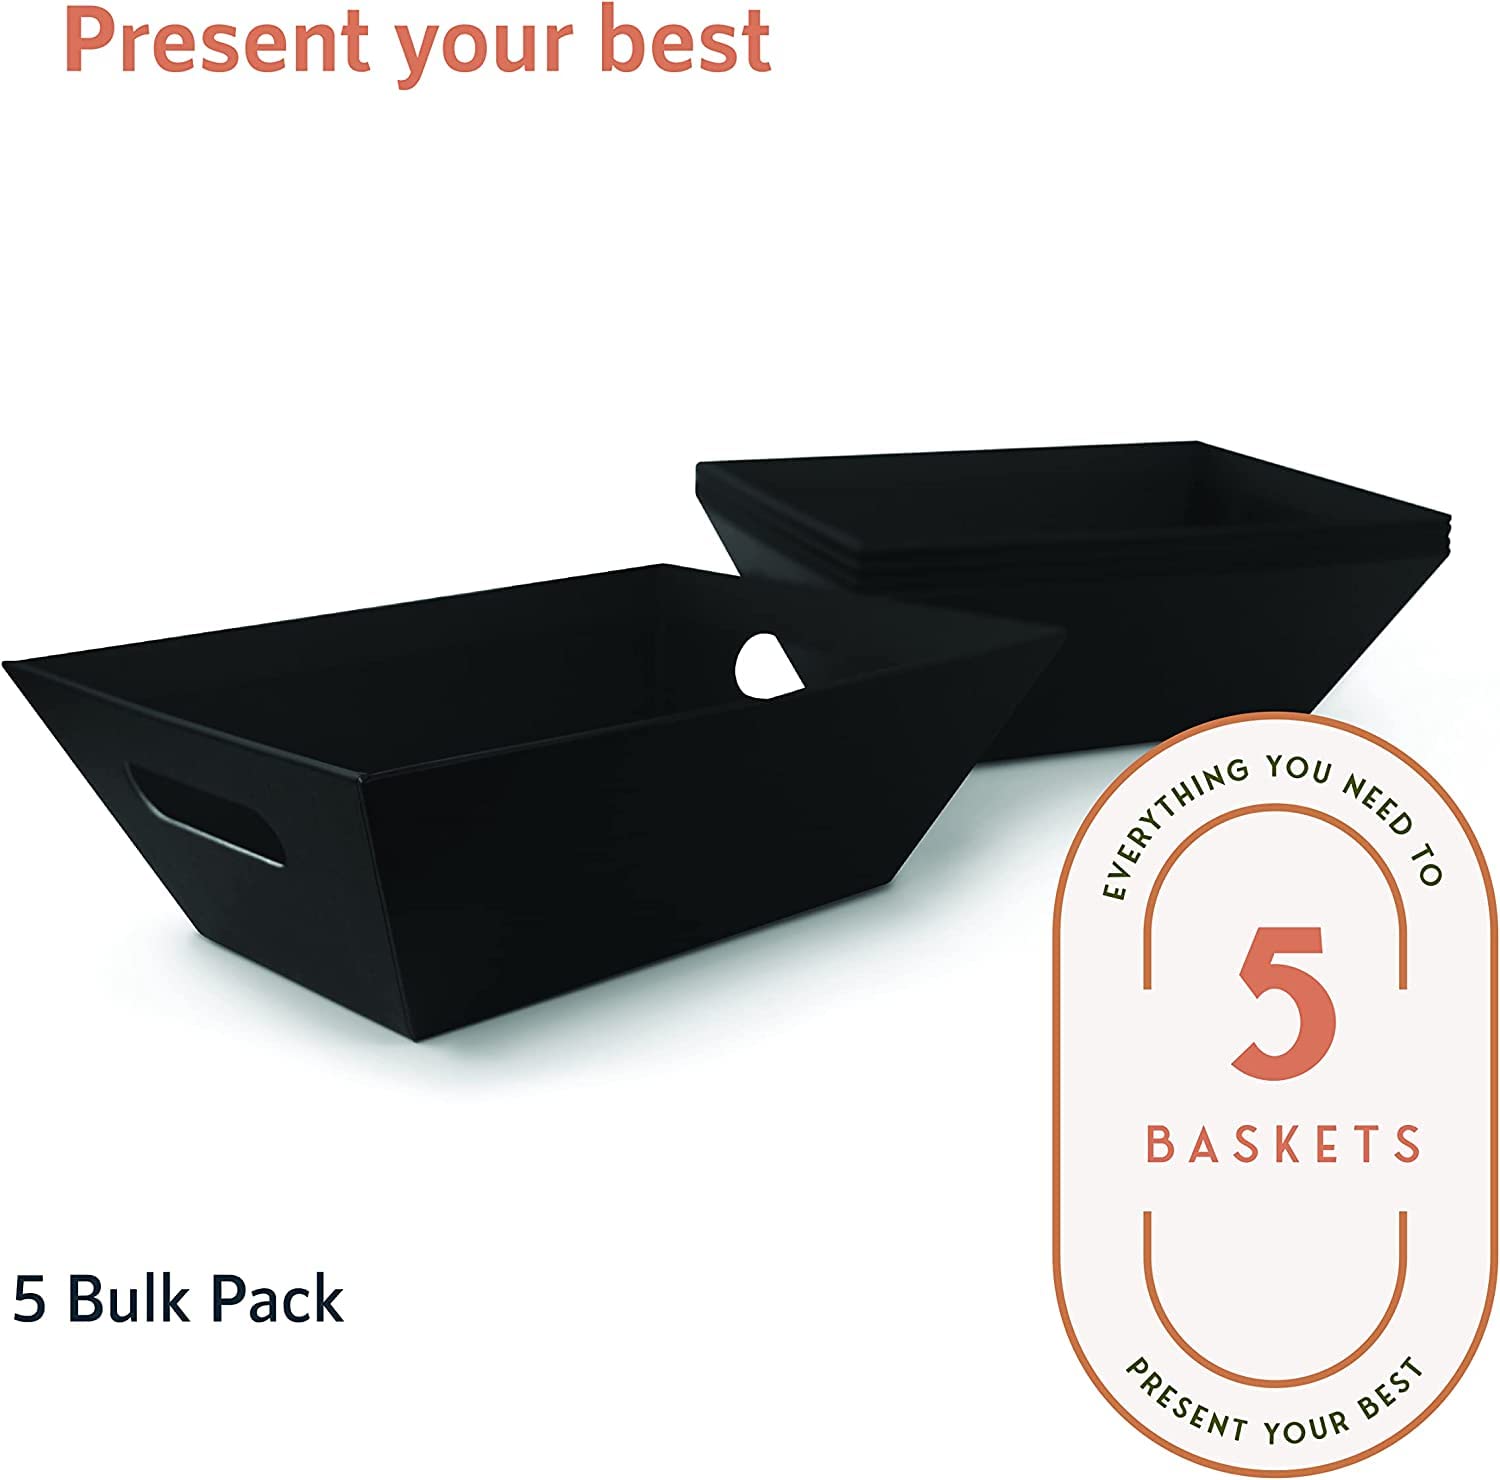 [5pk] 10x12 Black Baskets for Gifts Empty | Basket for Snacks | Large Rectangular Basket with Handles |Wine Gift Basket | Storage, Display, Gifts | Gift to Impress-Upper Midland Products